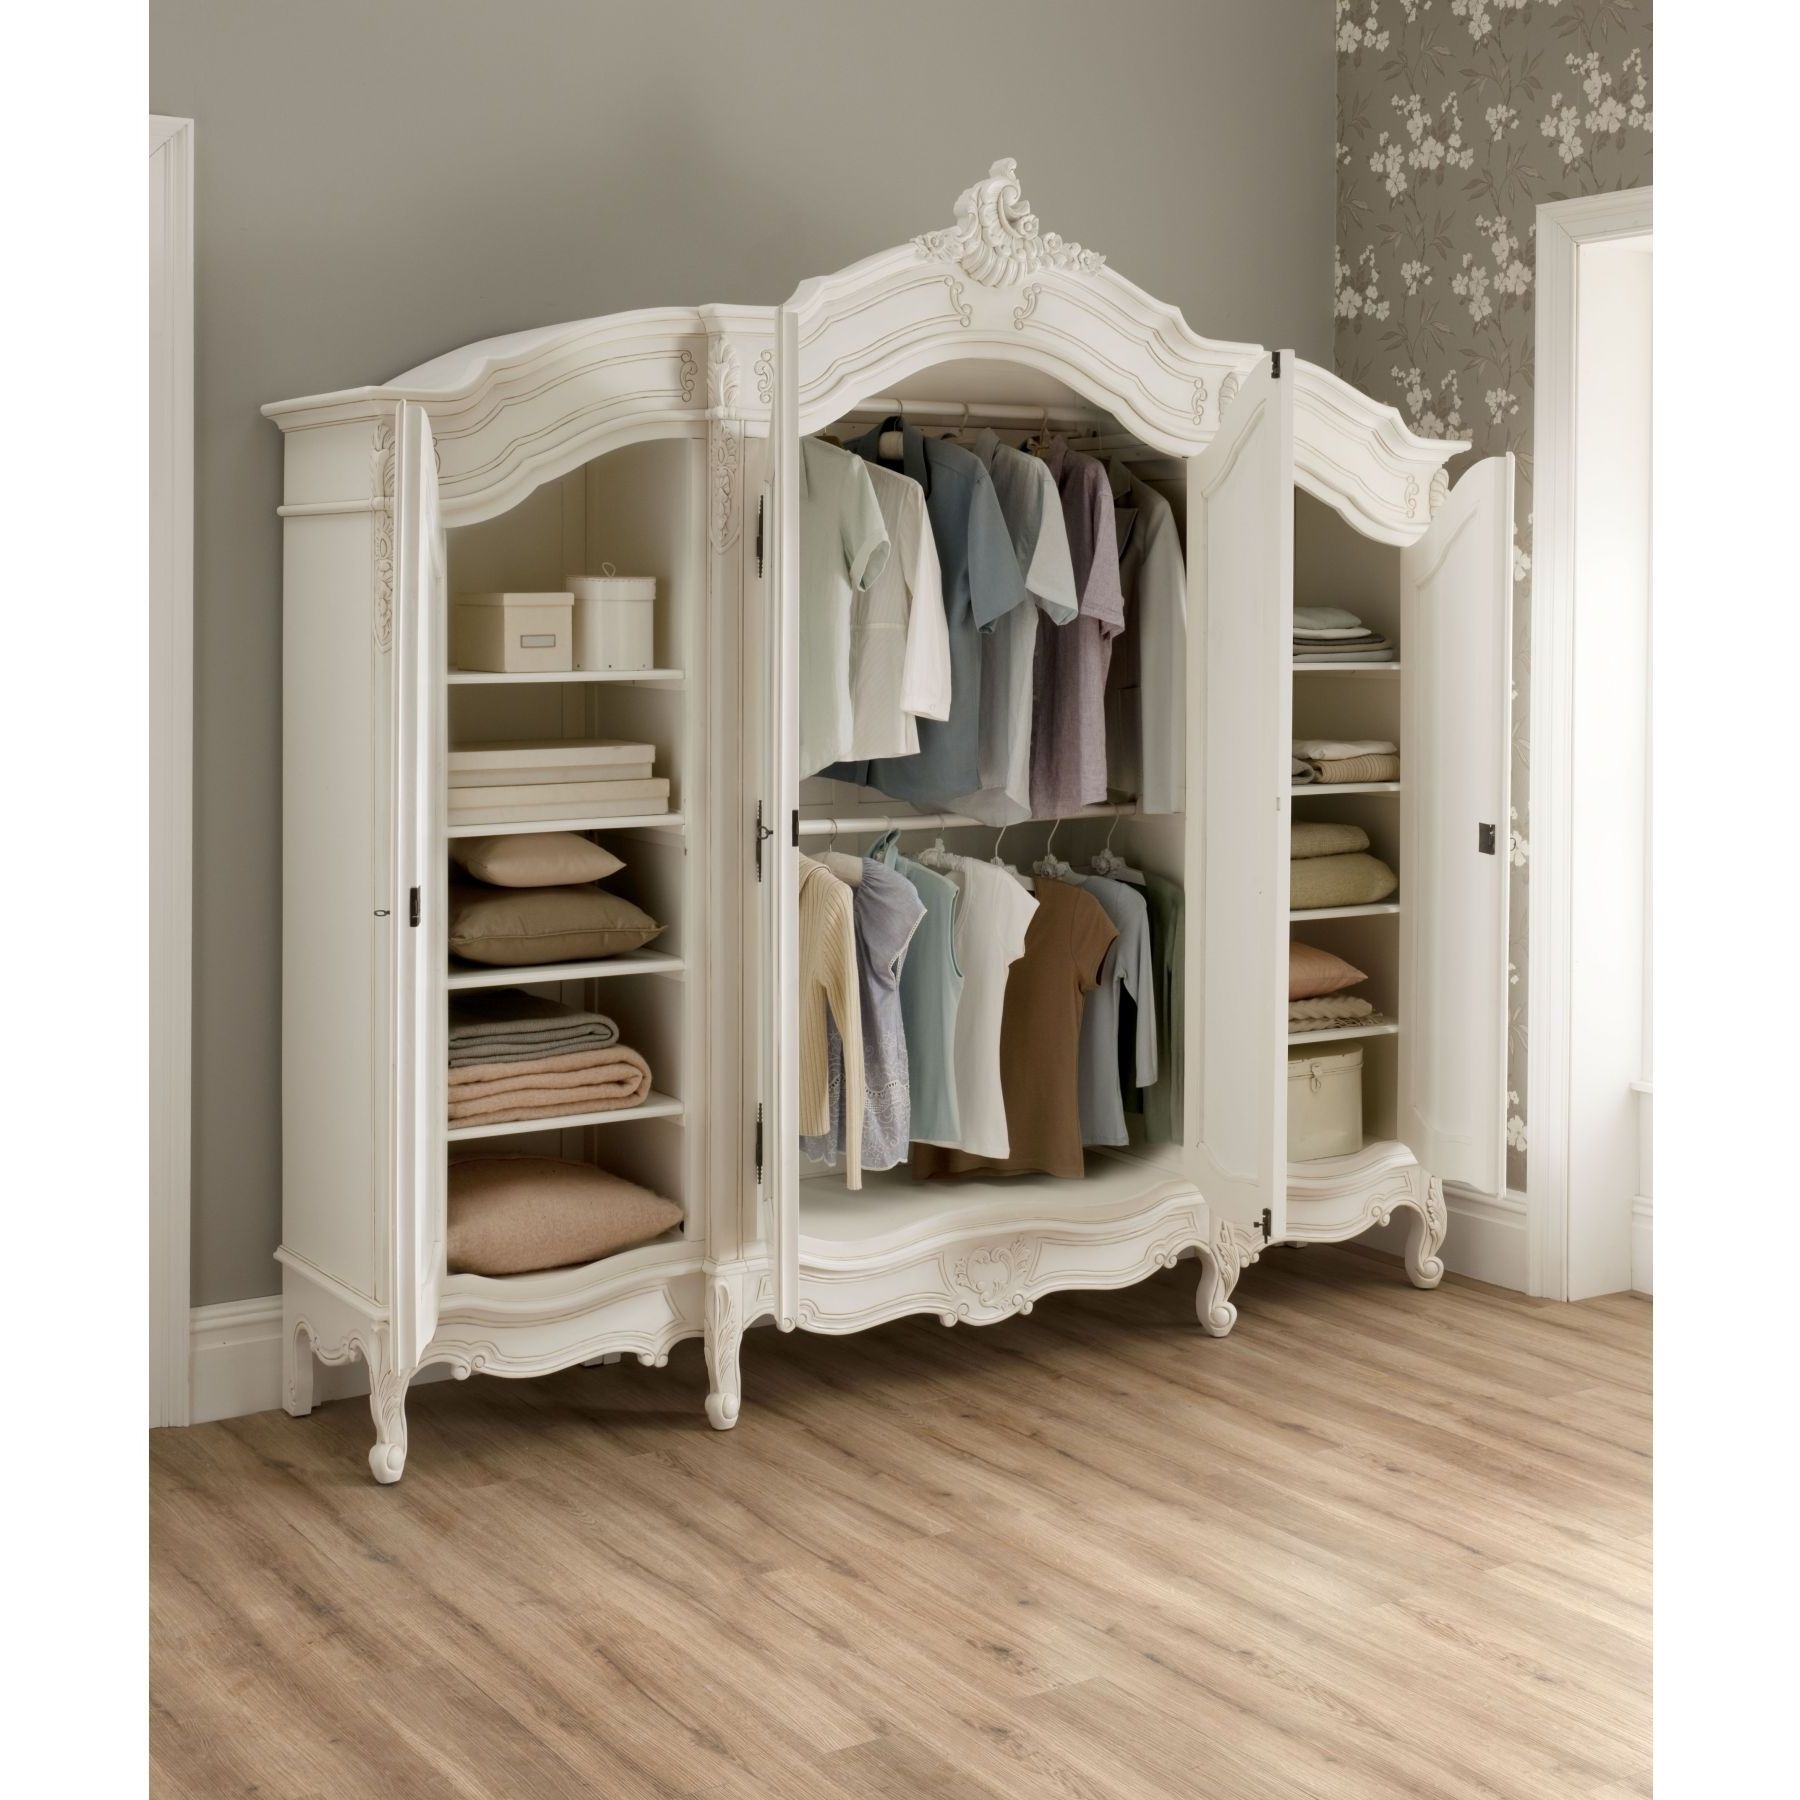 French Armoires Wardrobes Within Most Popular Collection French Armoires Wardrobes – Buildsimplehome (View 1 of 15)